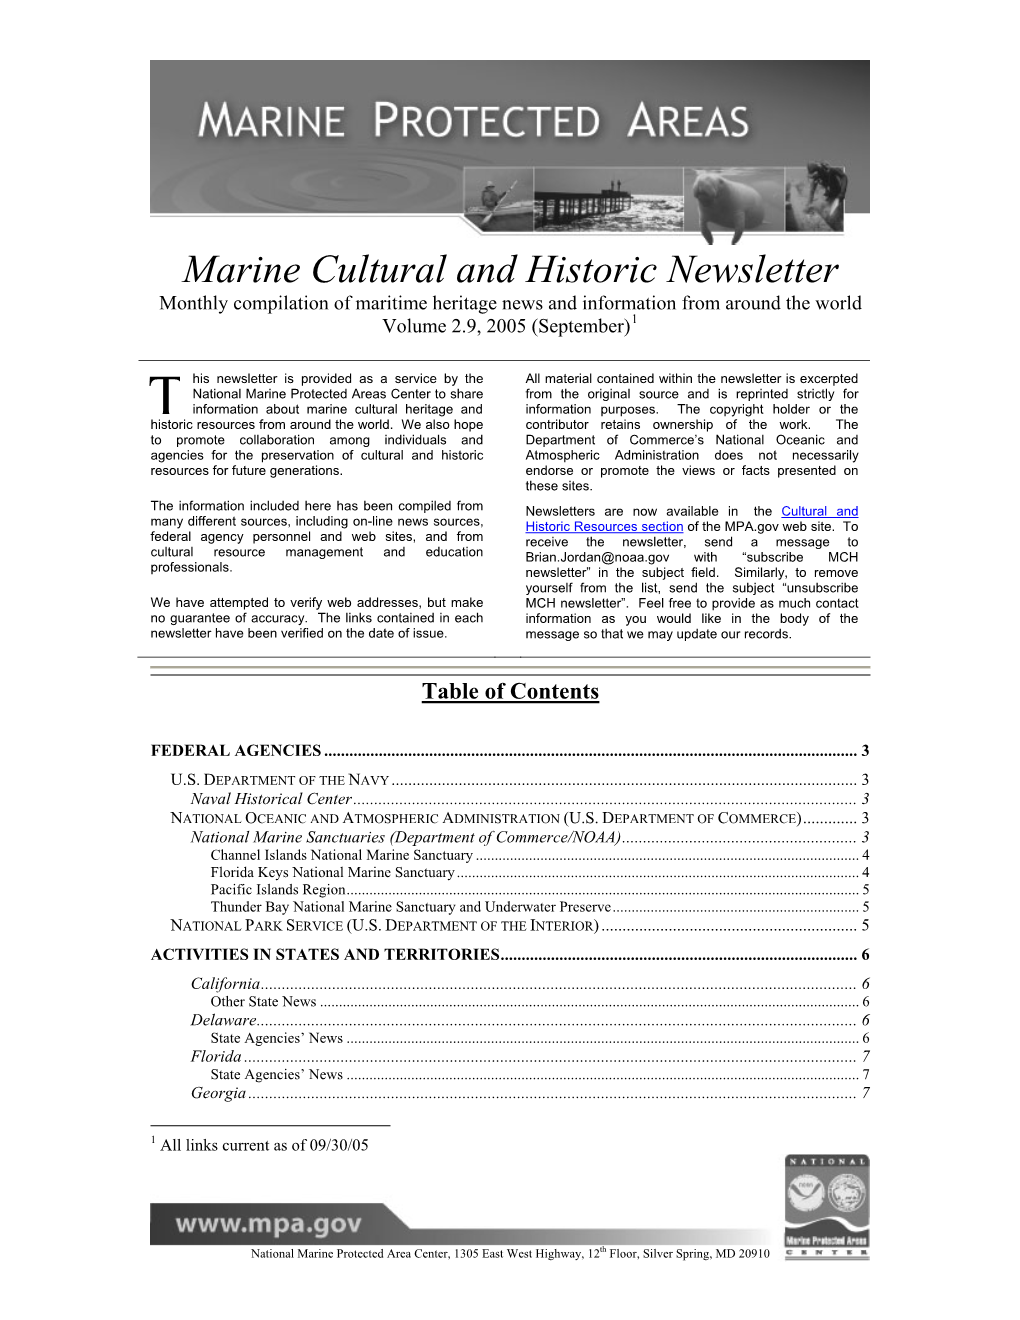 Marine Cultural and Historic Newsletter Vol 2(9)